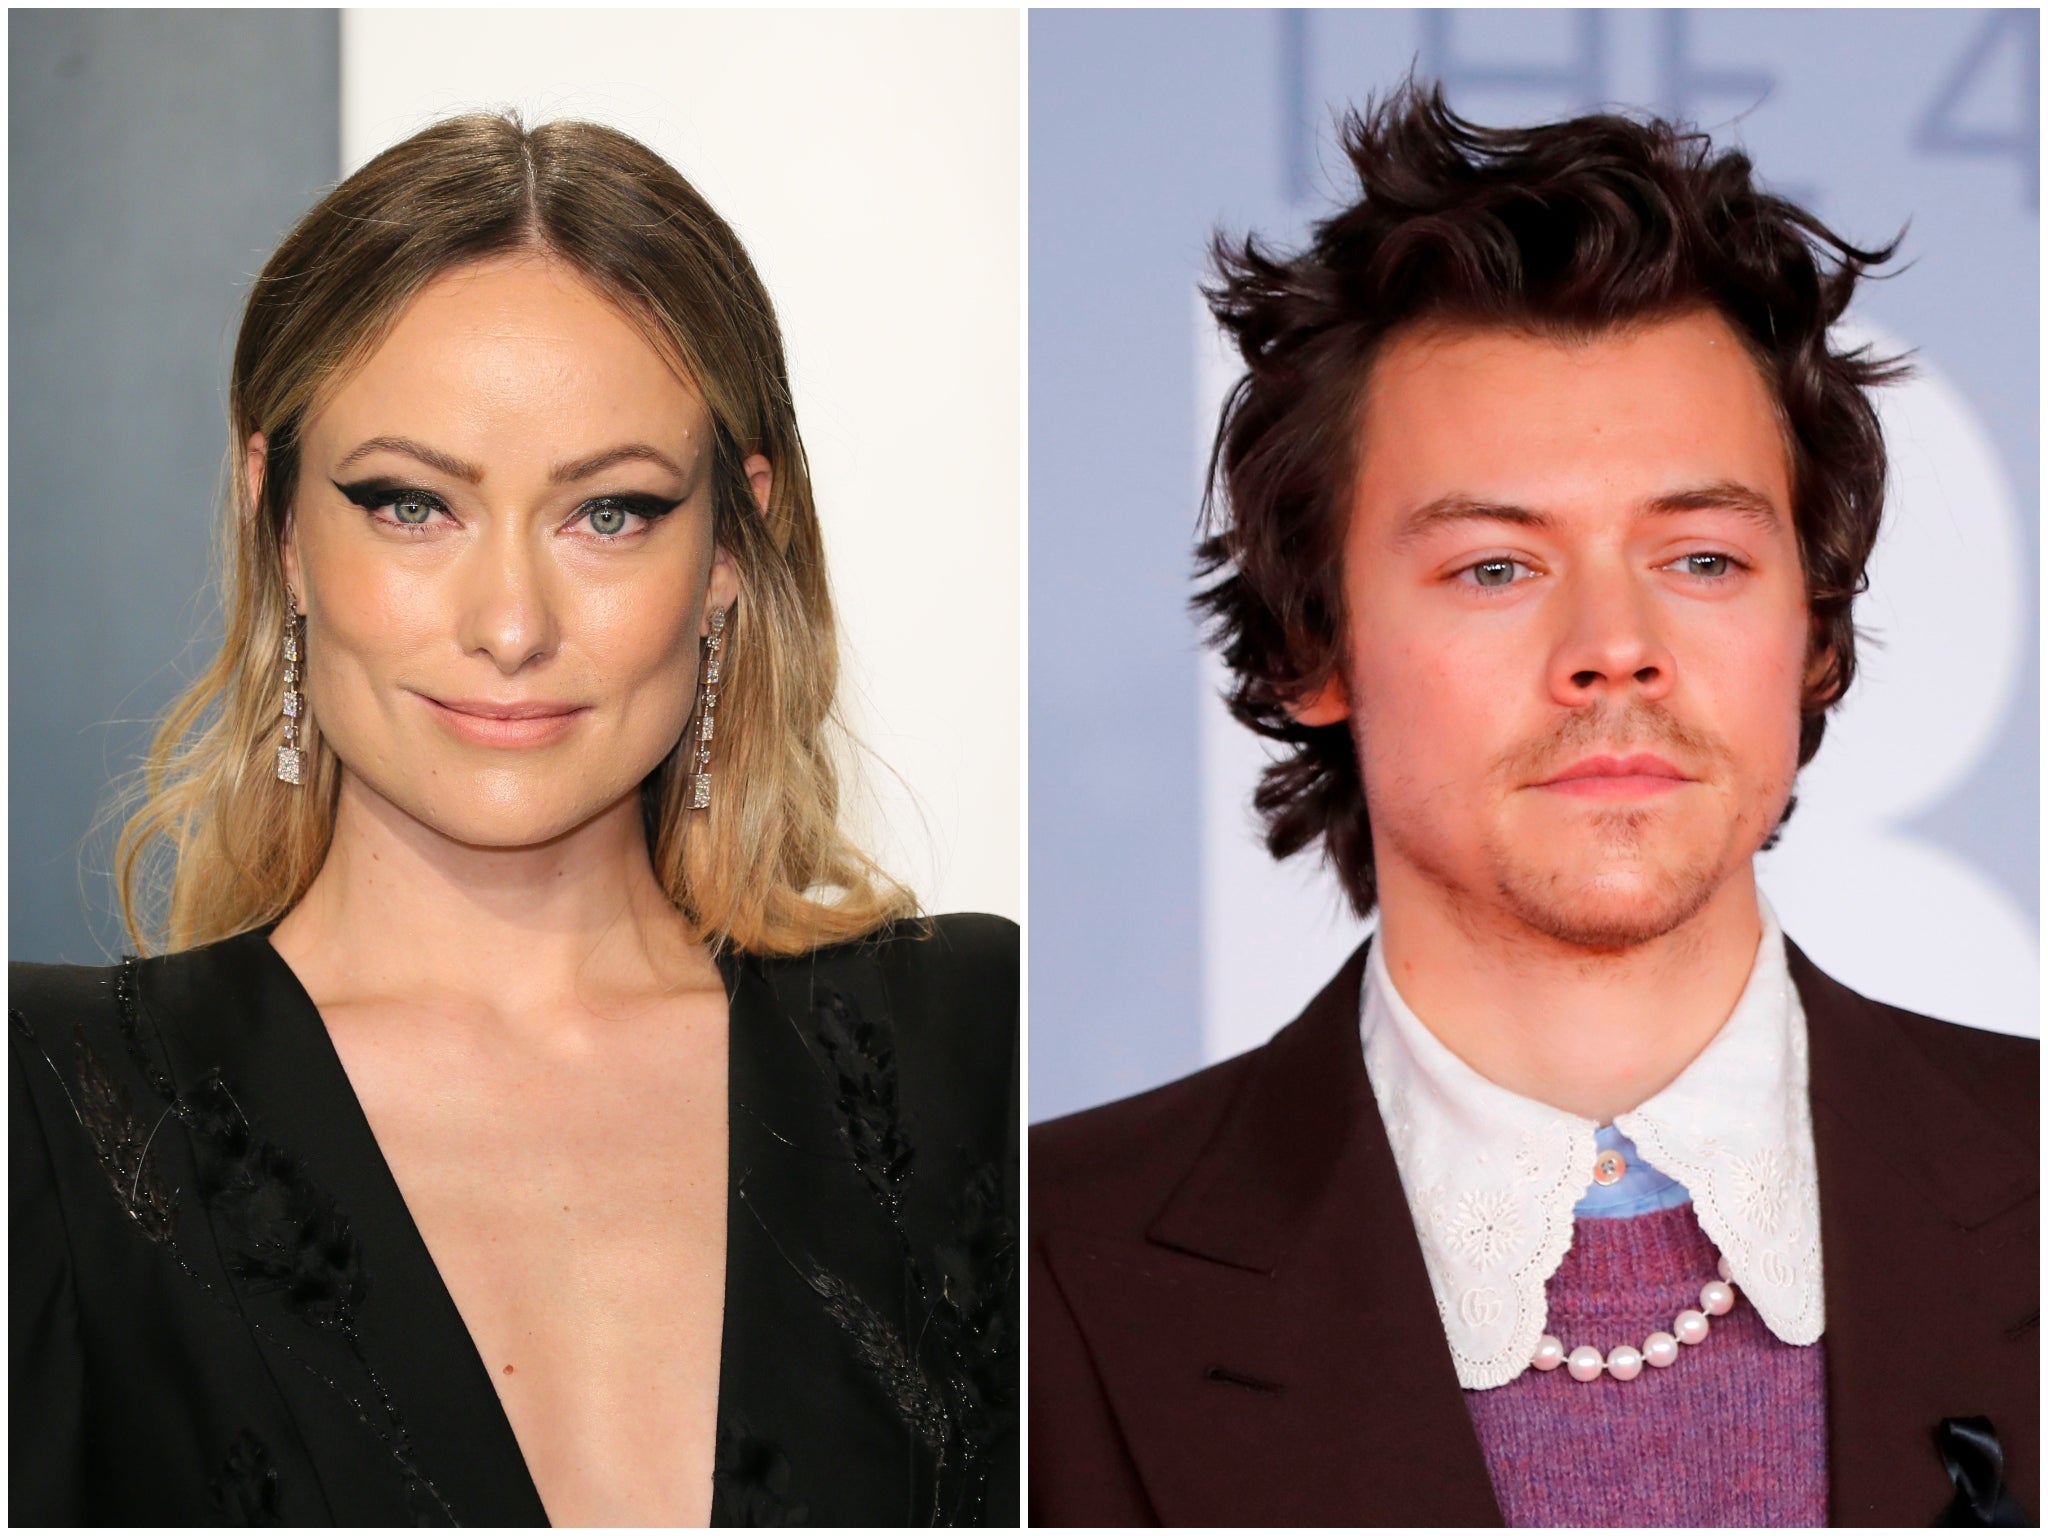 Harry Styles and Olivia Wilde have a 10-year age gap